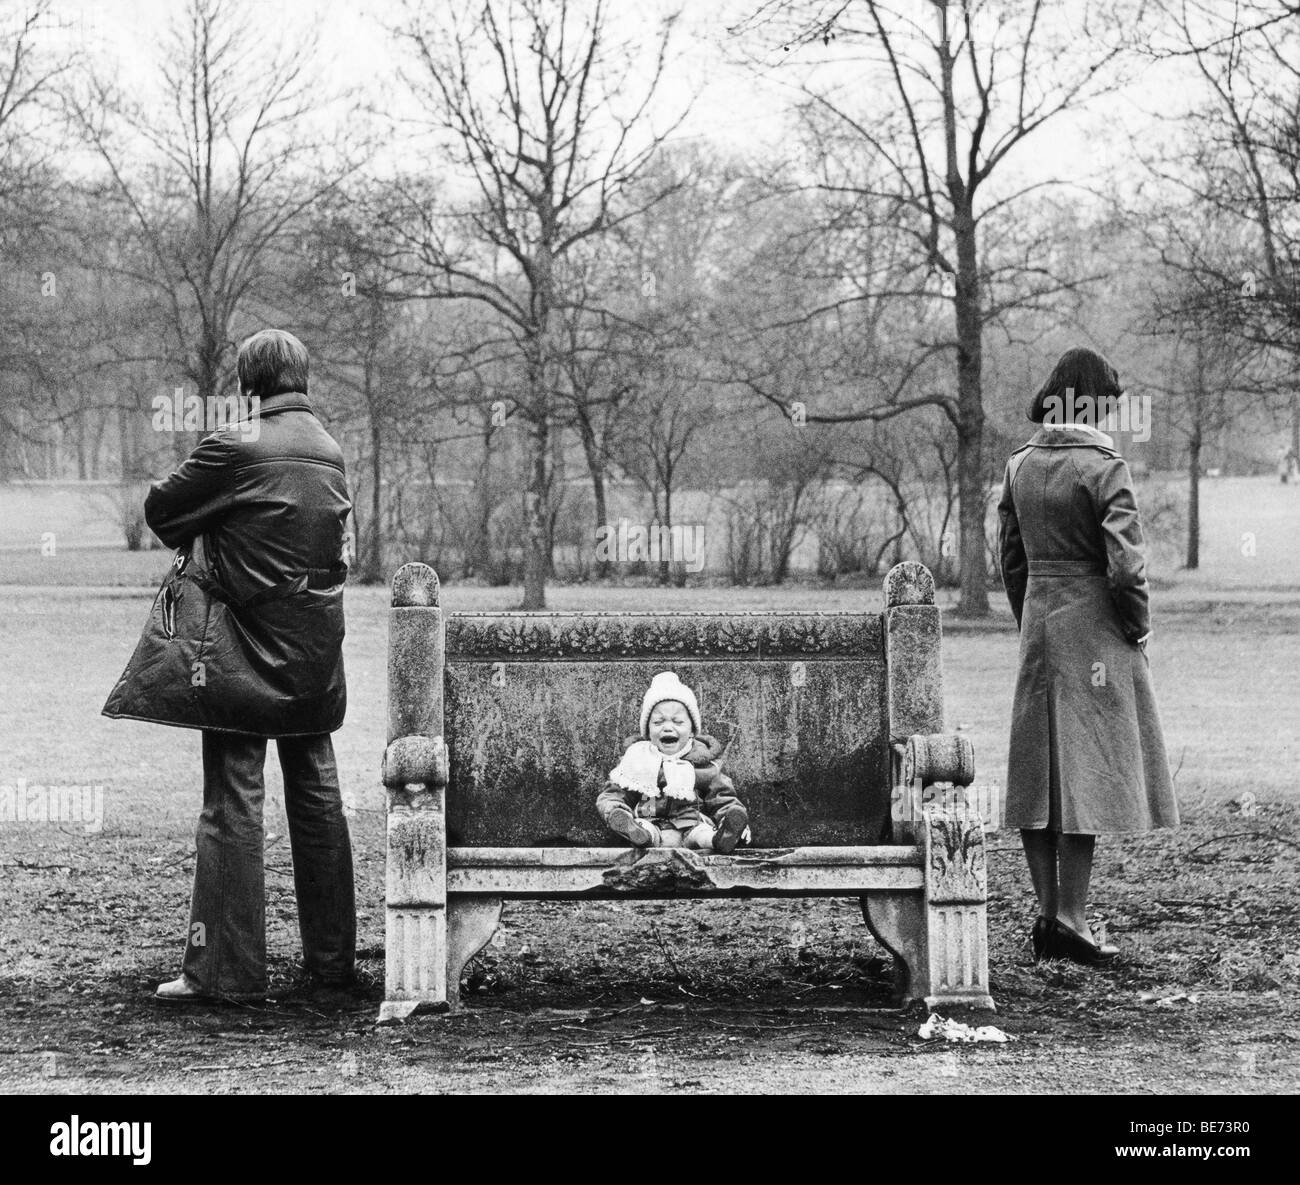 Crying child, parents at odds, Leipzig, GDR, East Germany, historical photo, about 1978 Stock Photo